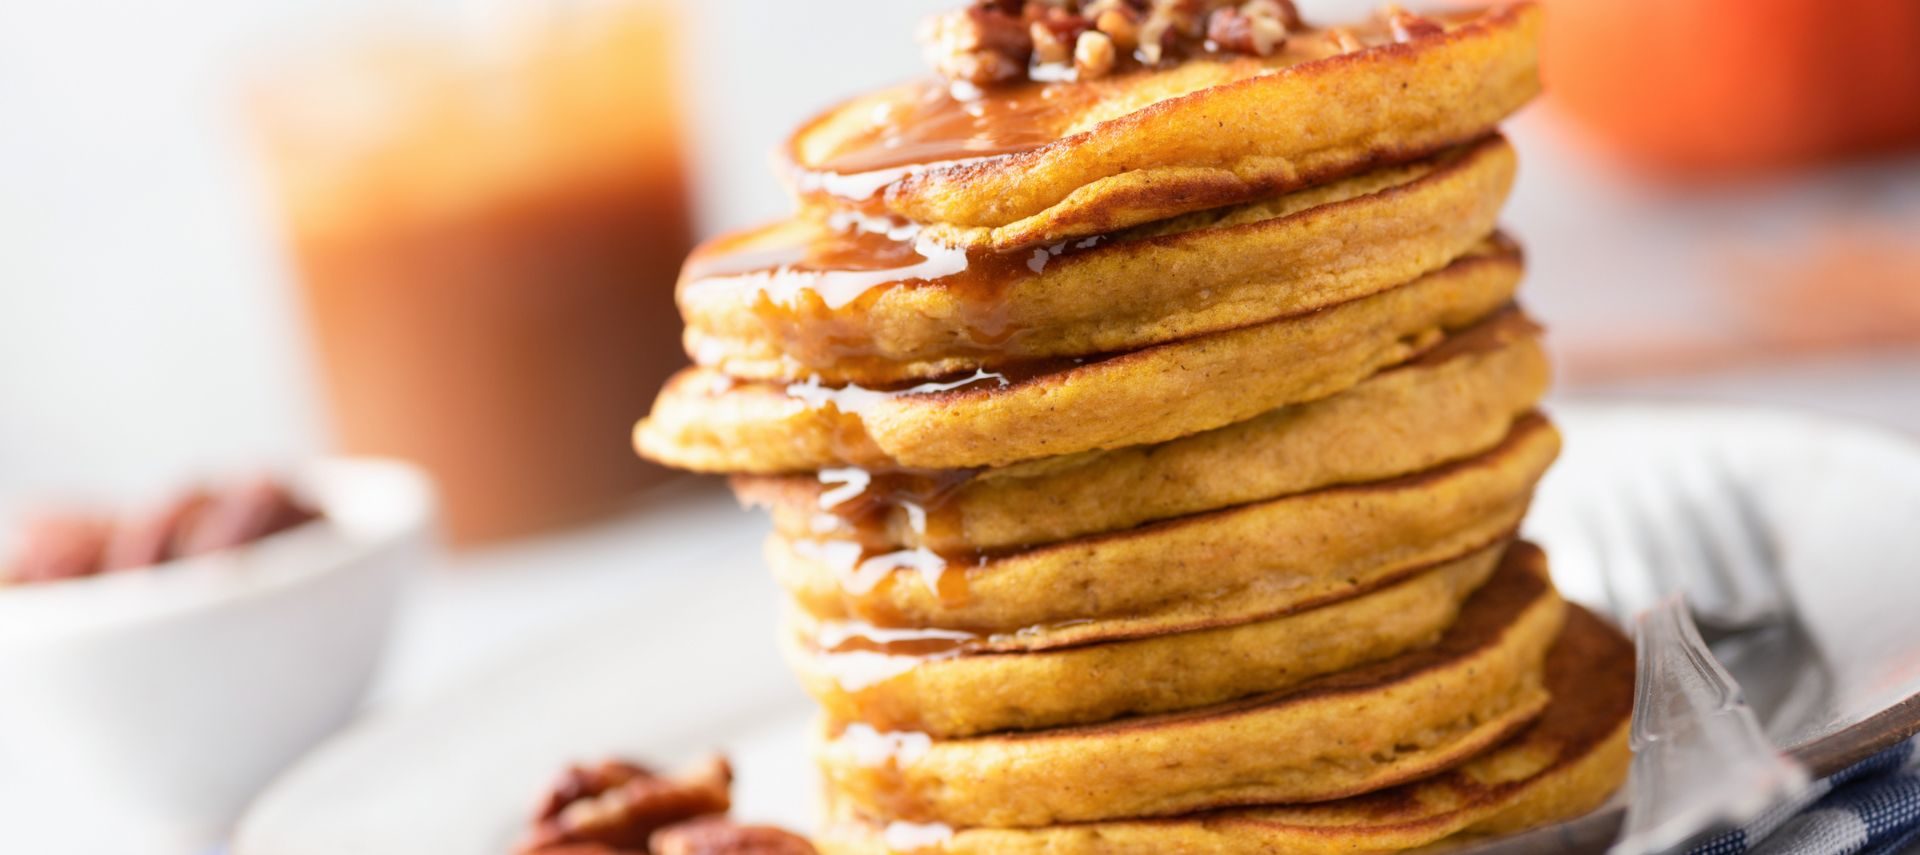 Stack of pecan pancakes with syrup, pecans on top with glass of juice behind